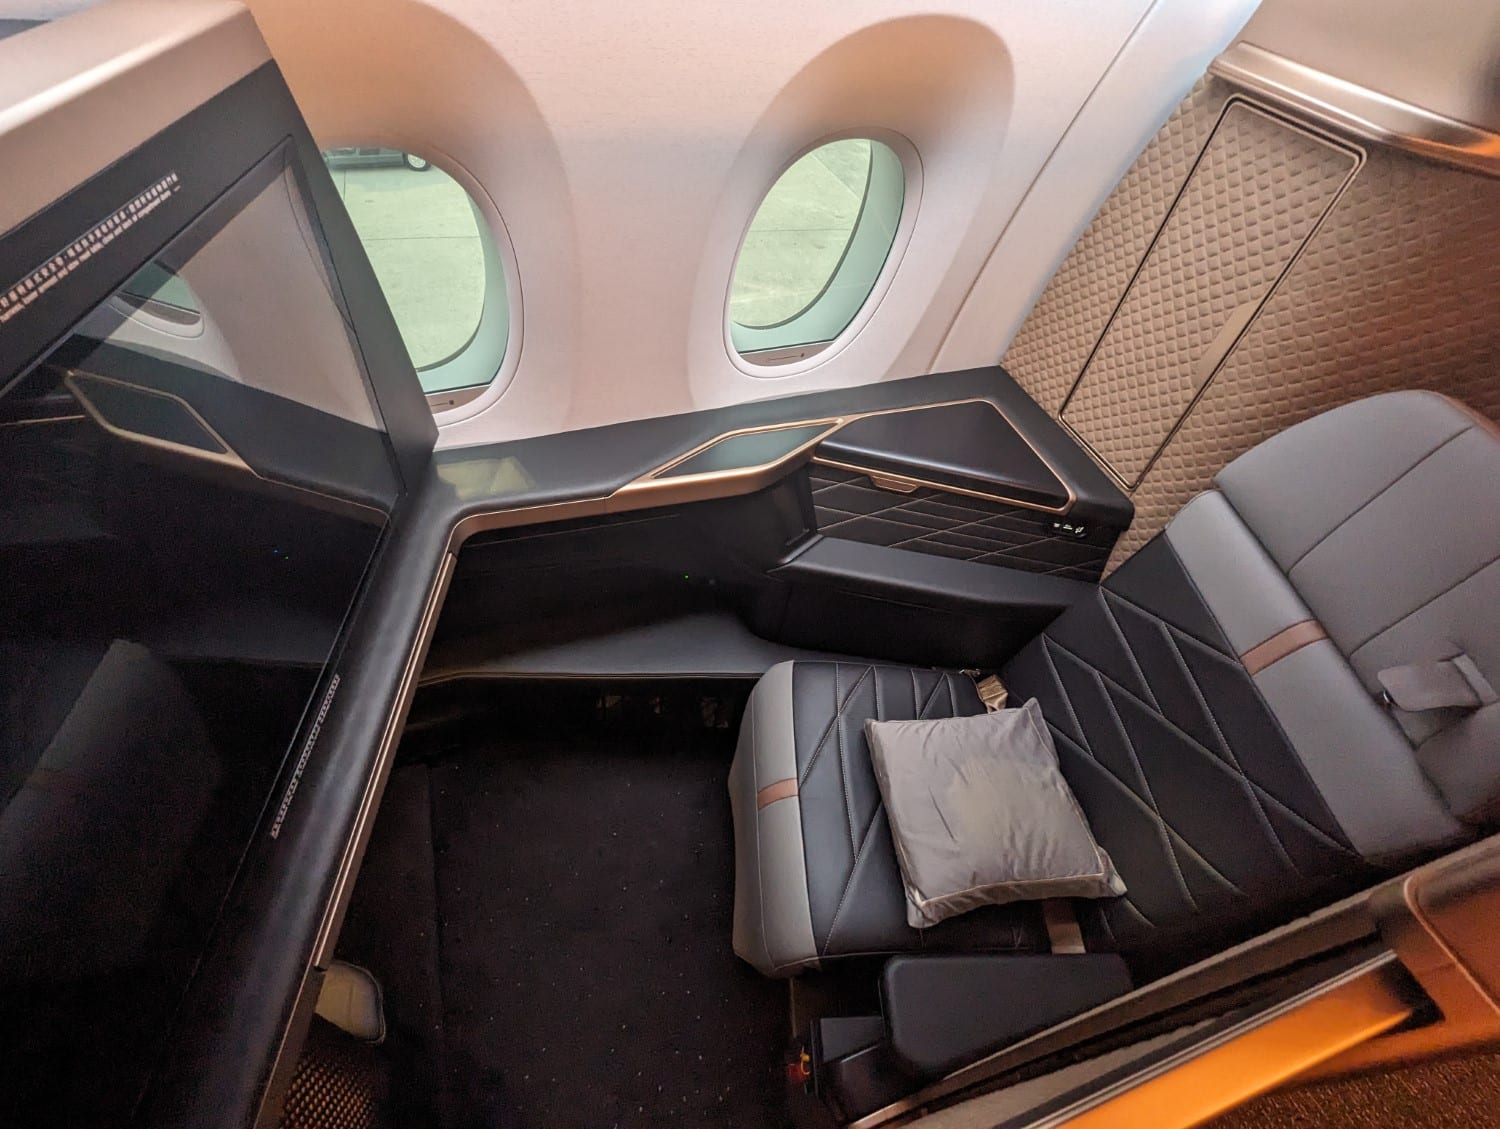 Starlux Airlines first class seat onboard the A350.